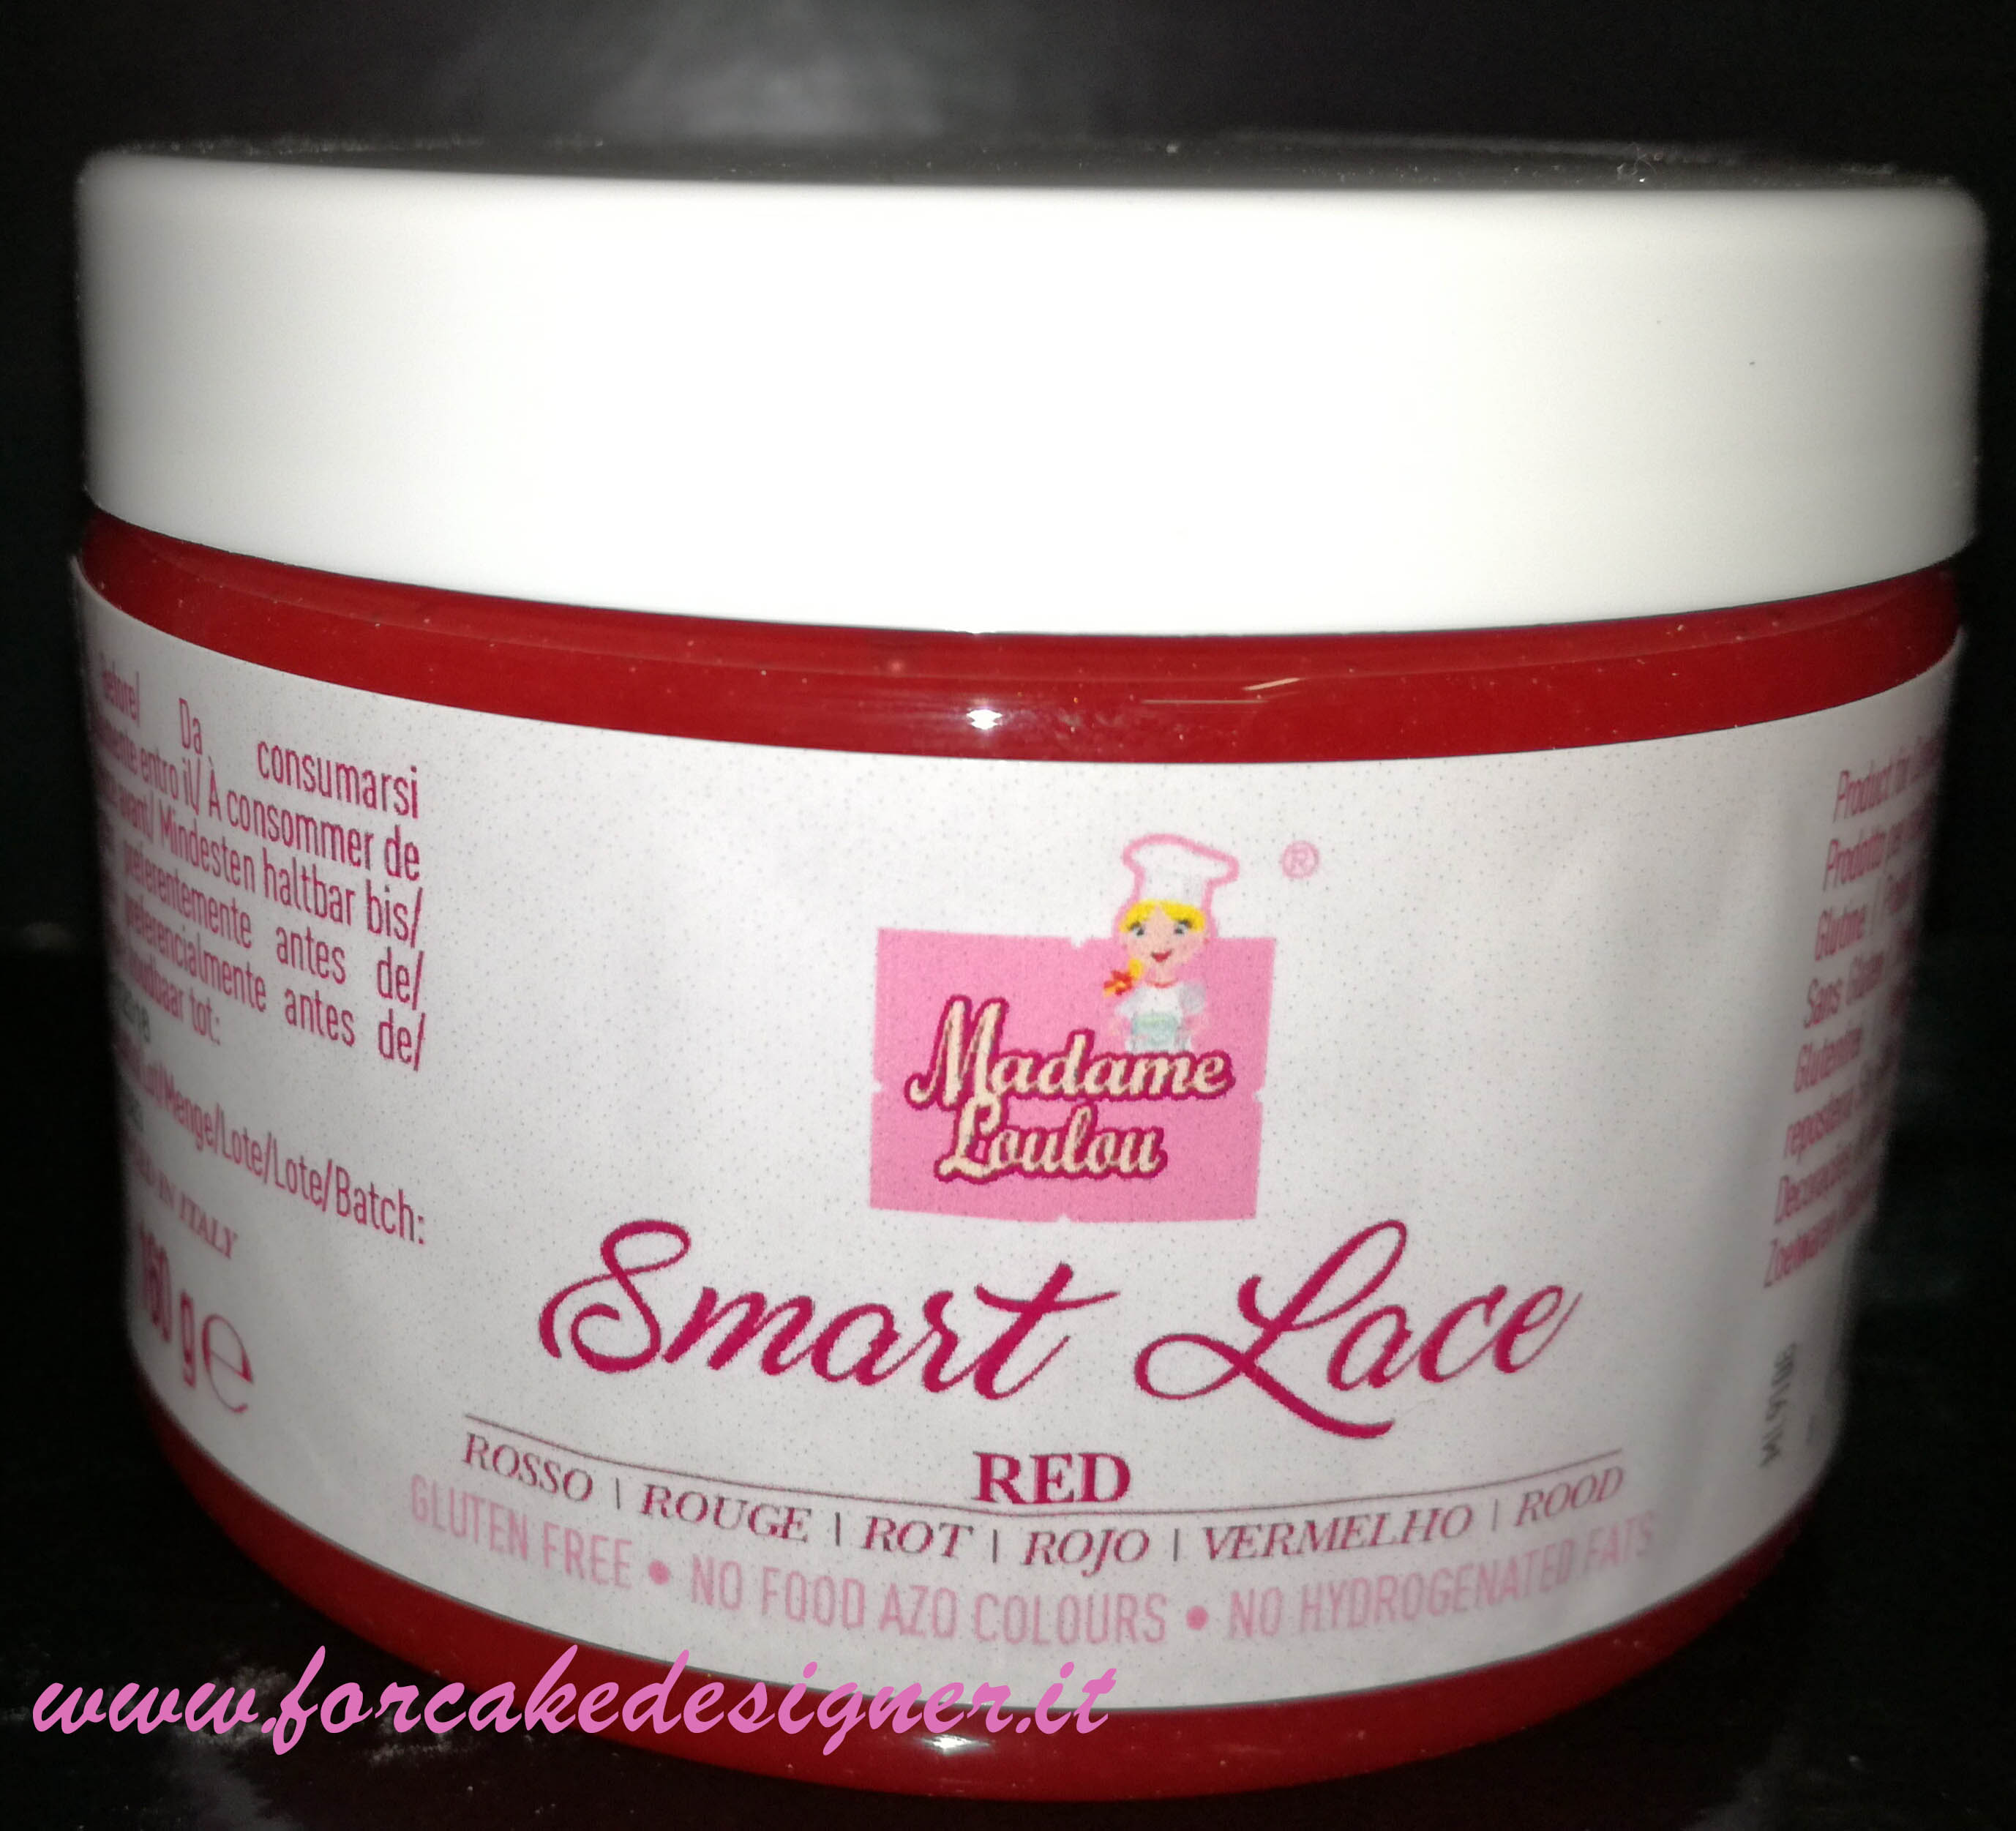  Foto: Madame Loulou - Smart Lace rosso 160 gr.